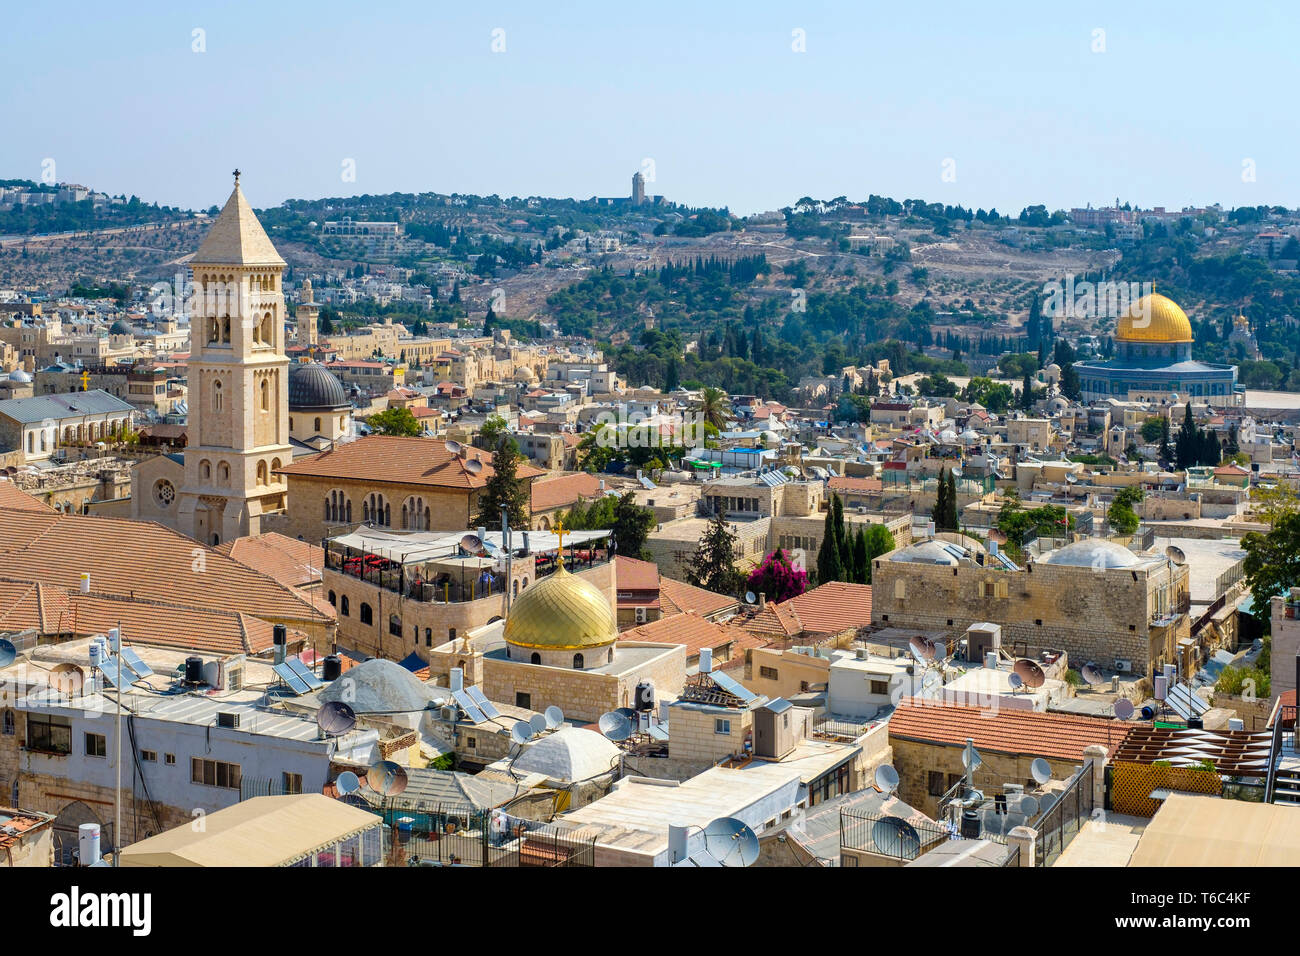 Israel, Jerusalem District, Jerusalem. The bellower of the Lutheran Church of the Redeemer and buildings in the Old City. Stock Photo